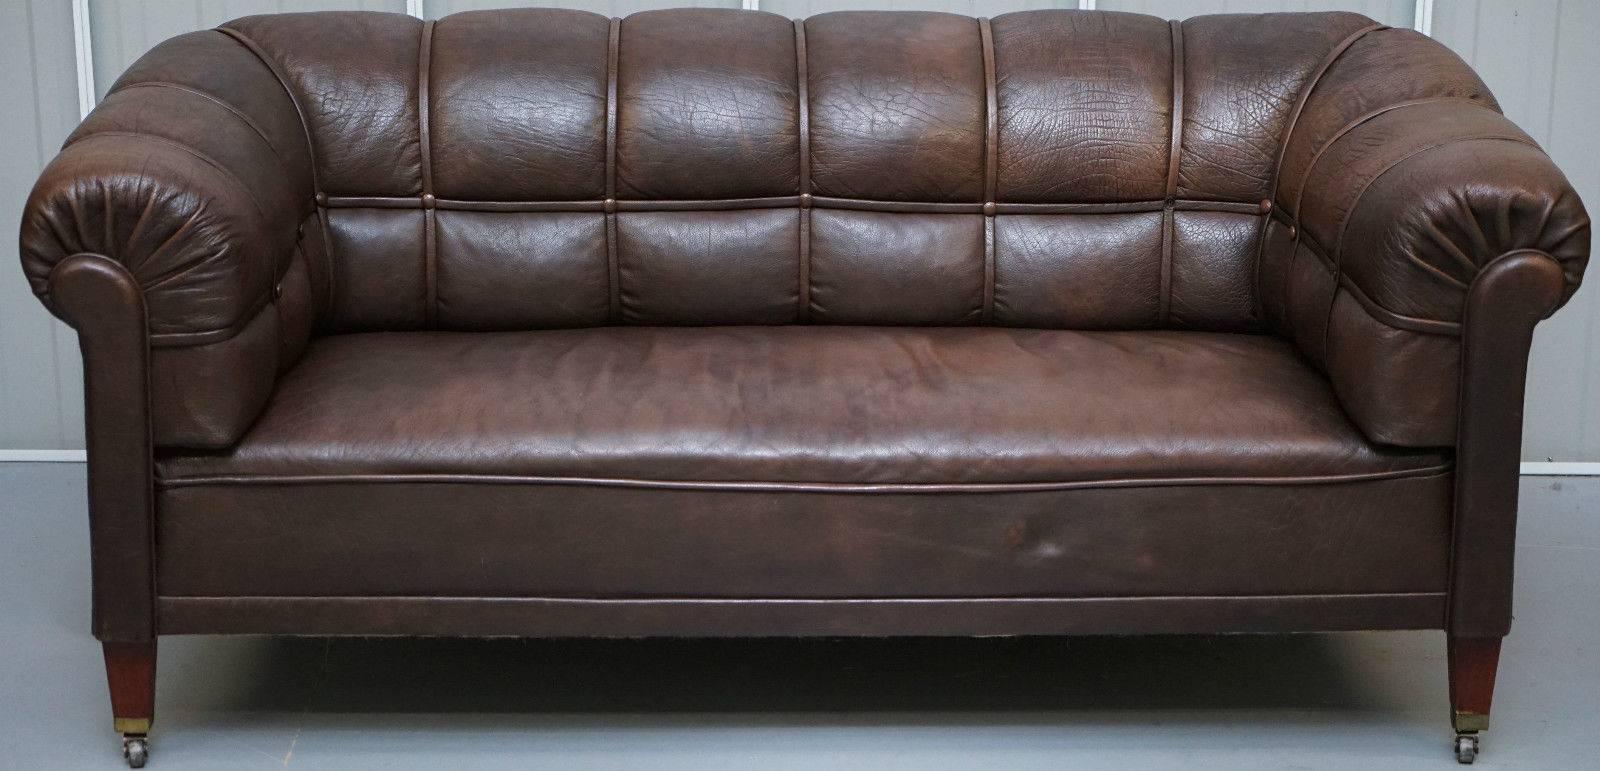 We are delighted to offer for sale this original Victorian, circa 1860 Swedish aged brown leather Chesterfield club sofa in stunning condition

A really very rare find, you won’t see another one of these for sale anywhere especially in this